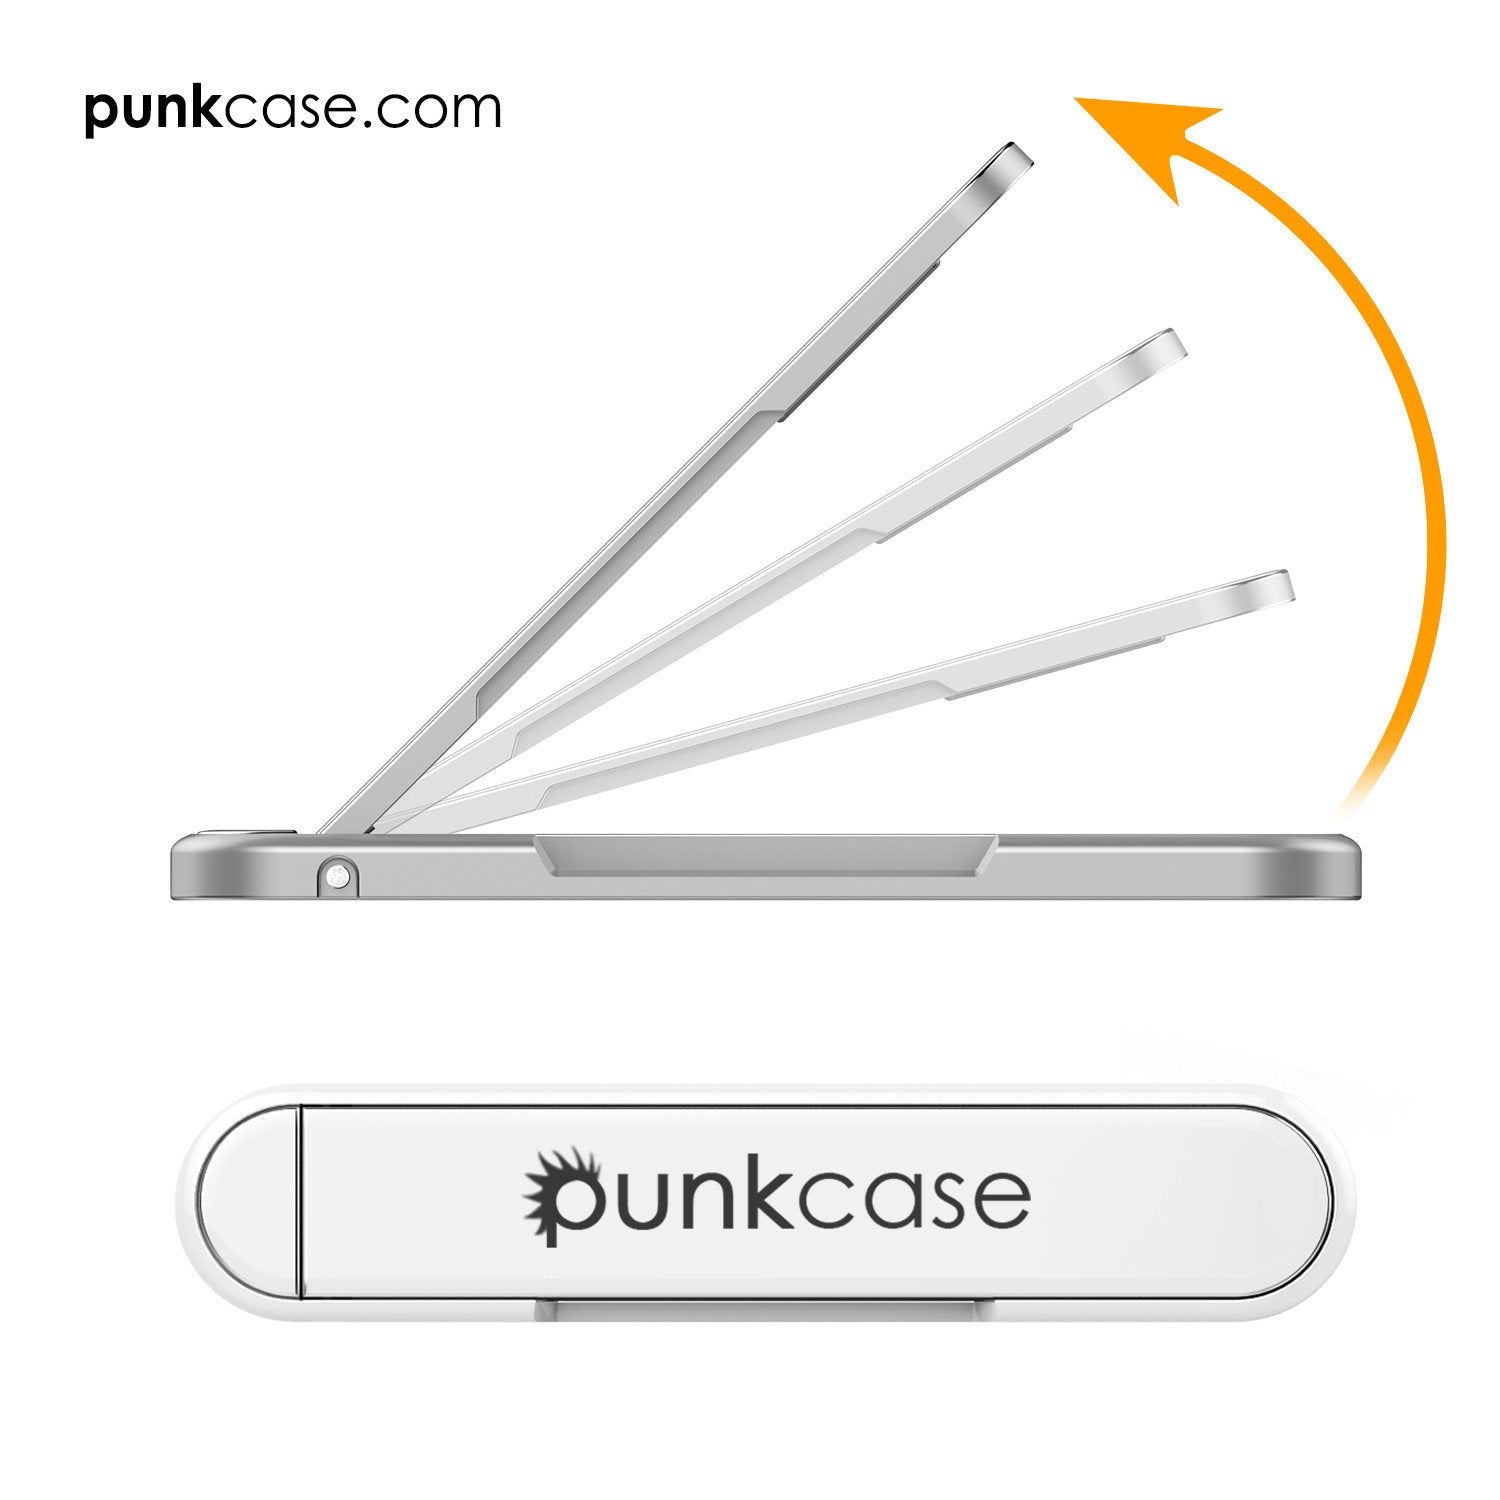 PUNKCASE FlickStick Universal Cell Phone Kickstand for all Mobile Phones & Cases with Flat Backs, One Finger Operation (White) - PunkCase NZ